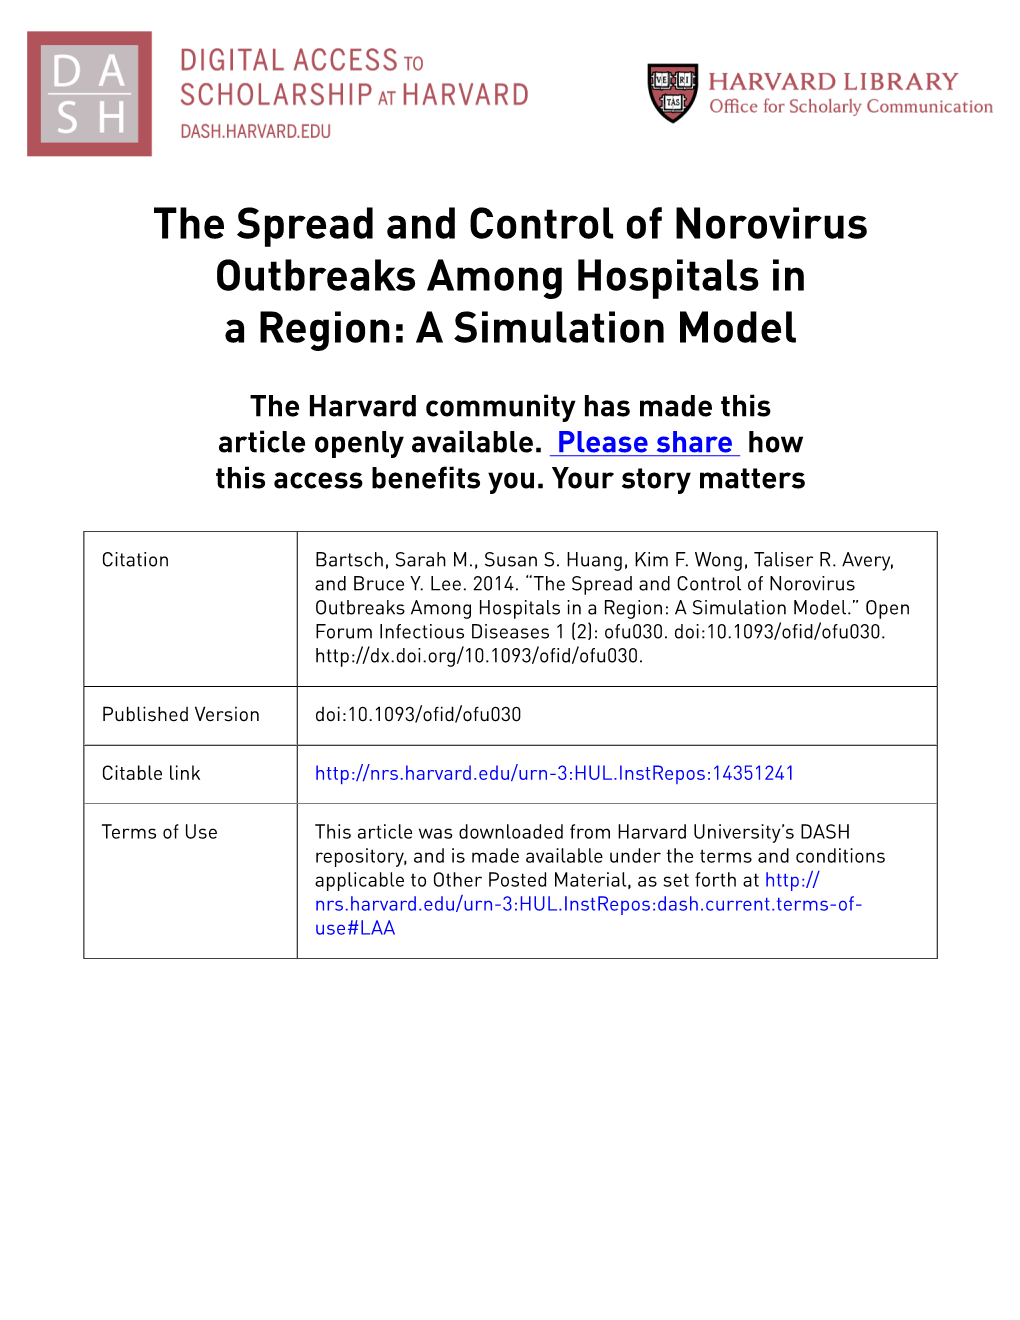 The Spread and Control of Norovirus Outbreaks Among Hospitals in a Region: a Simulation Model